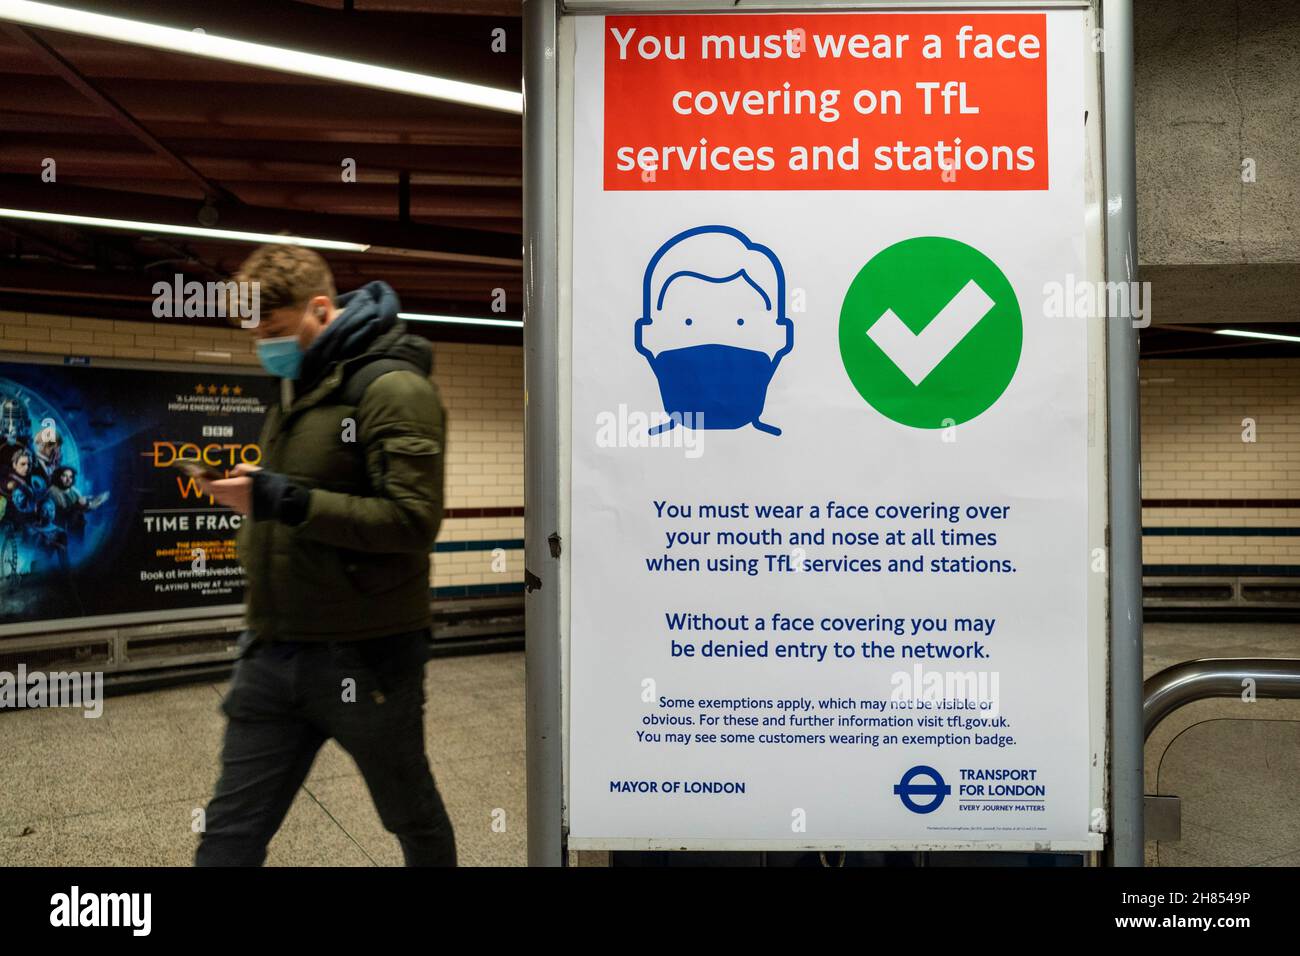 London, UK.  27 November 2021.  People at Baker Street station pass a sign requiring the wearing of facemasks. Boris Johnson, Prime Minister, has announced in a press conference measures to curb the spread of coronavirus in the UK in response to two cases of the Omicron variant being detected in the country.  Measures include mandatory wearing of facemasks in shops and public transport as well as PCR test for travellers entering the UK.  Credit: Stephen Chung / Alamy Live News Stock Photo